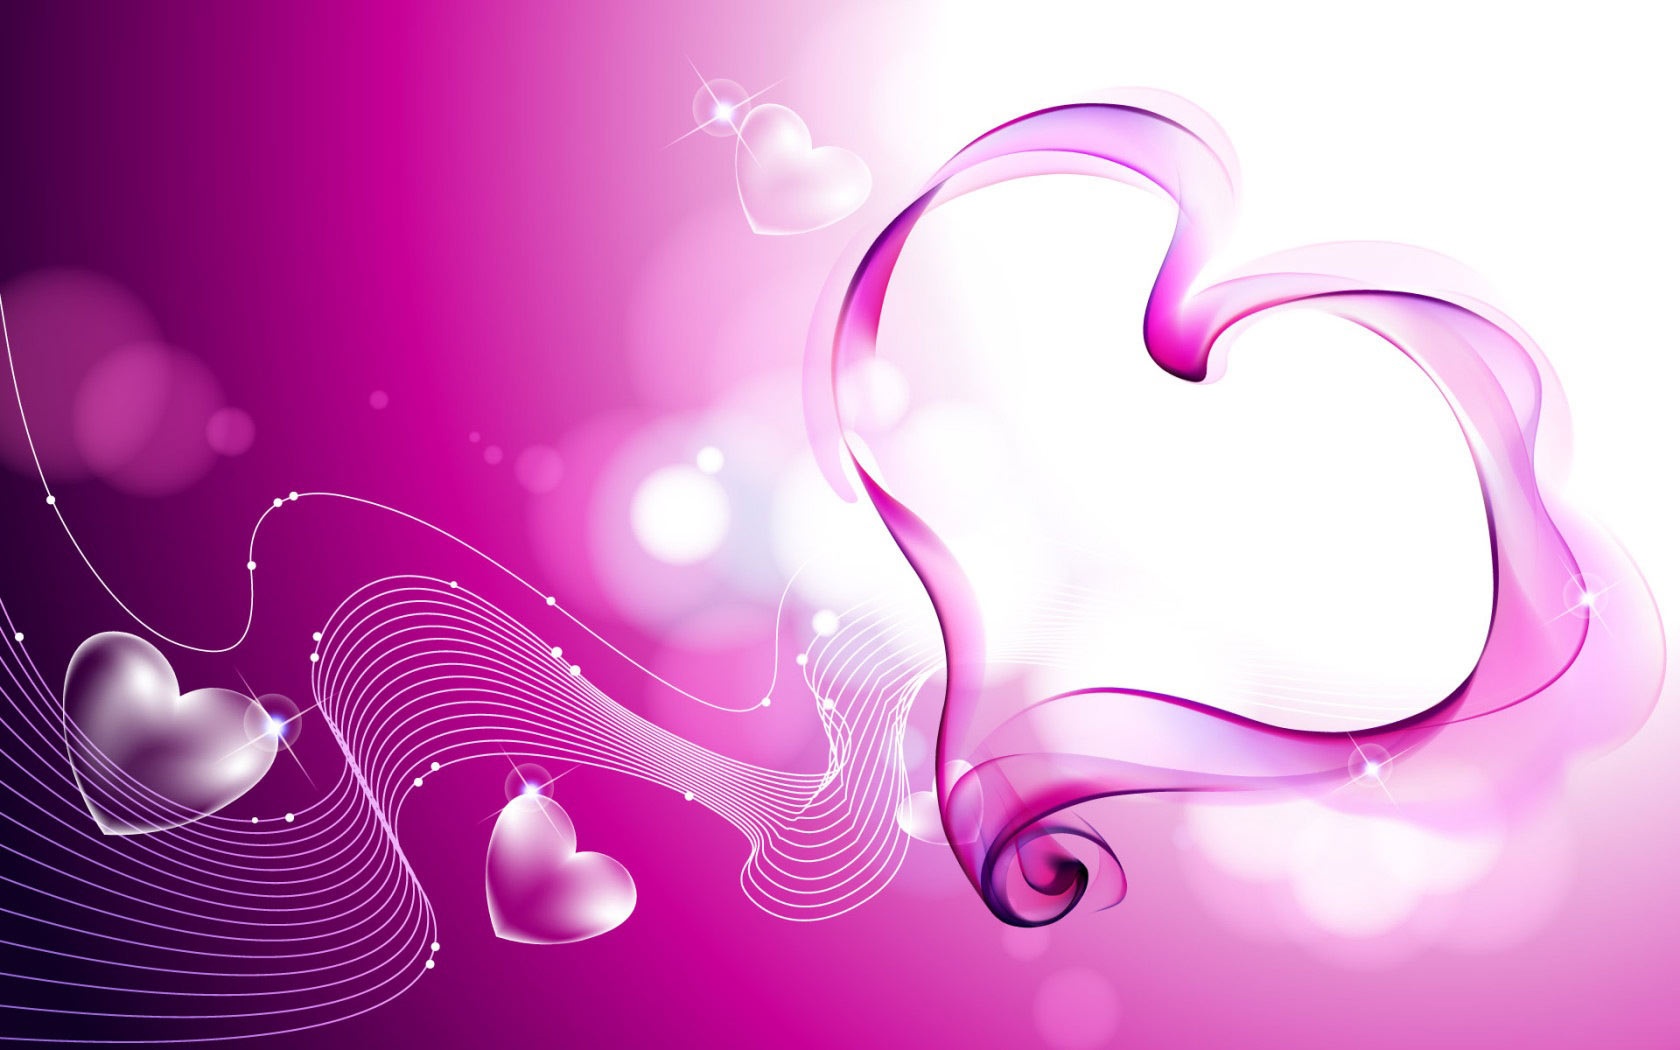 Heart Love Flame Wallpaper Pictures